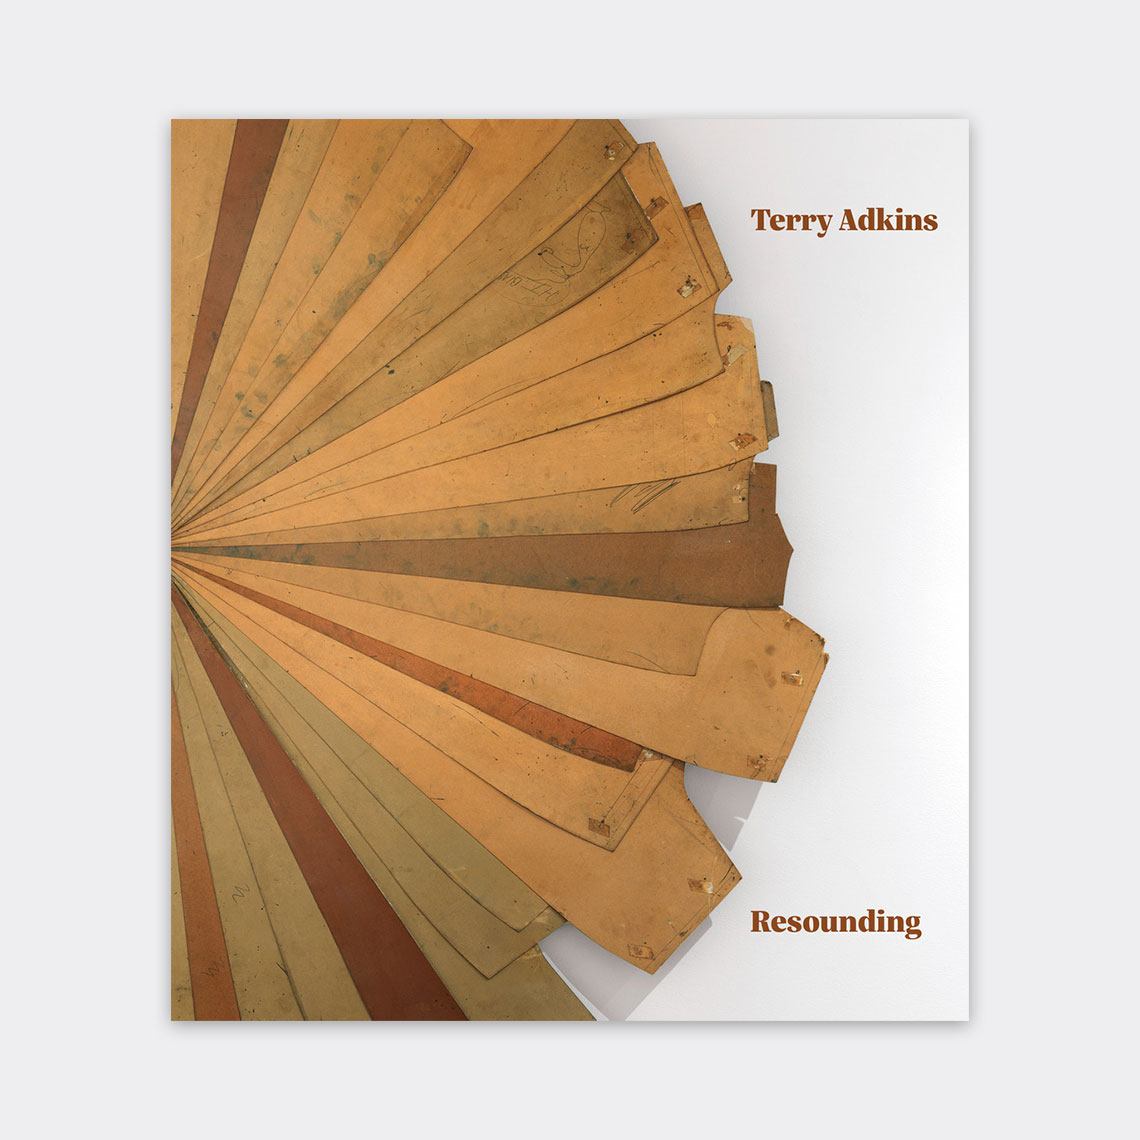 The exhibition catalogue cover for "Terry Adkins: Resounding."